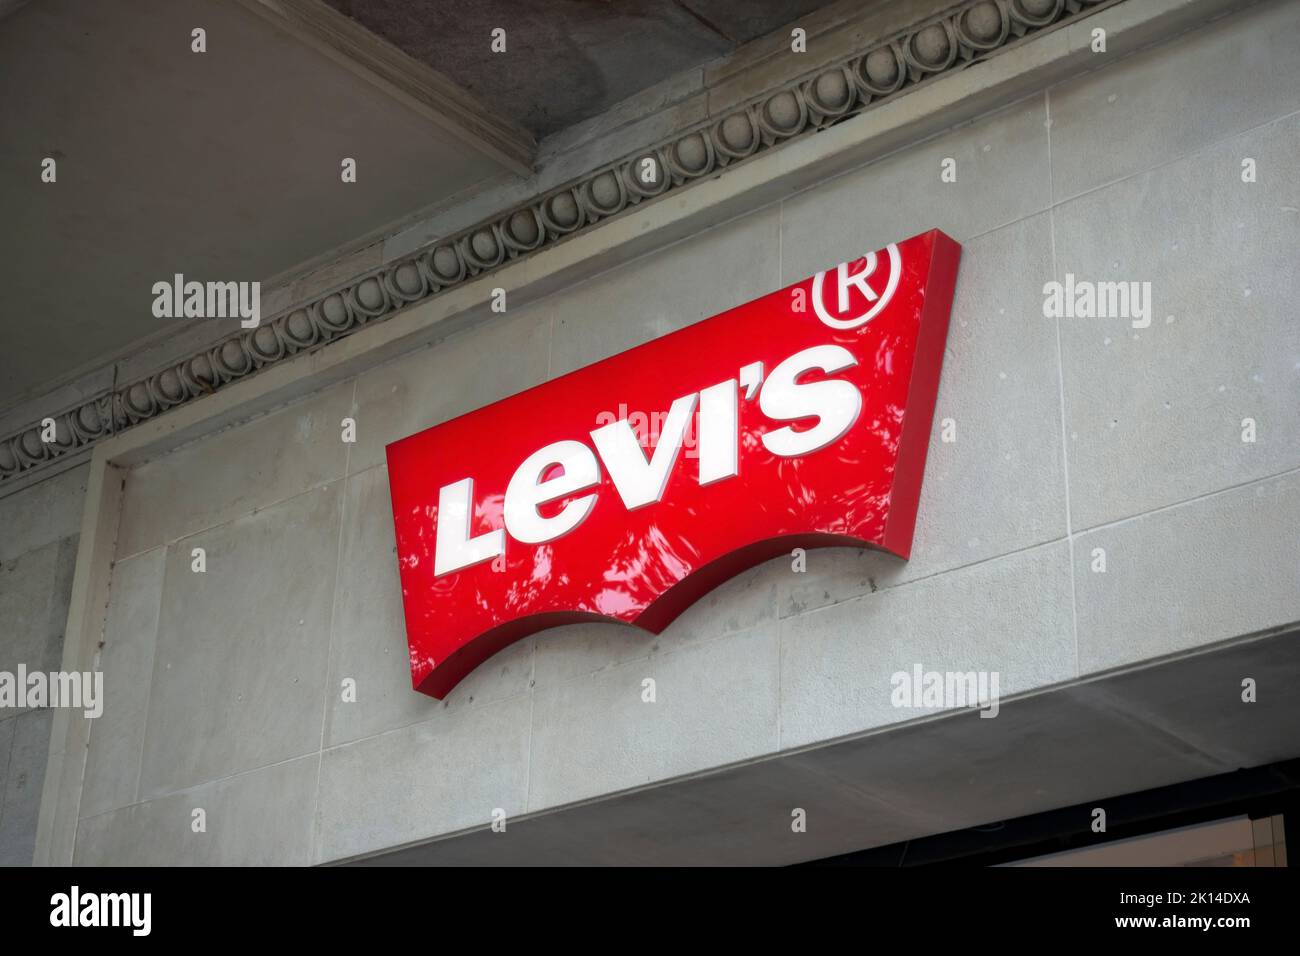 Barcelona, Spain - May 9, 2022. Levi Strauss sign on a wall. Levi Strauss & Co is an American clothing company known worldwide for its Levi's brand of Stock Photo